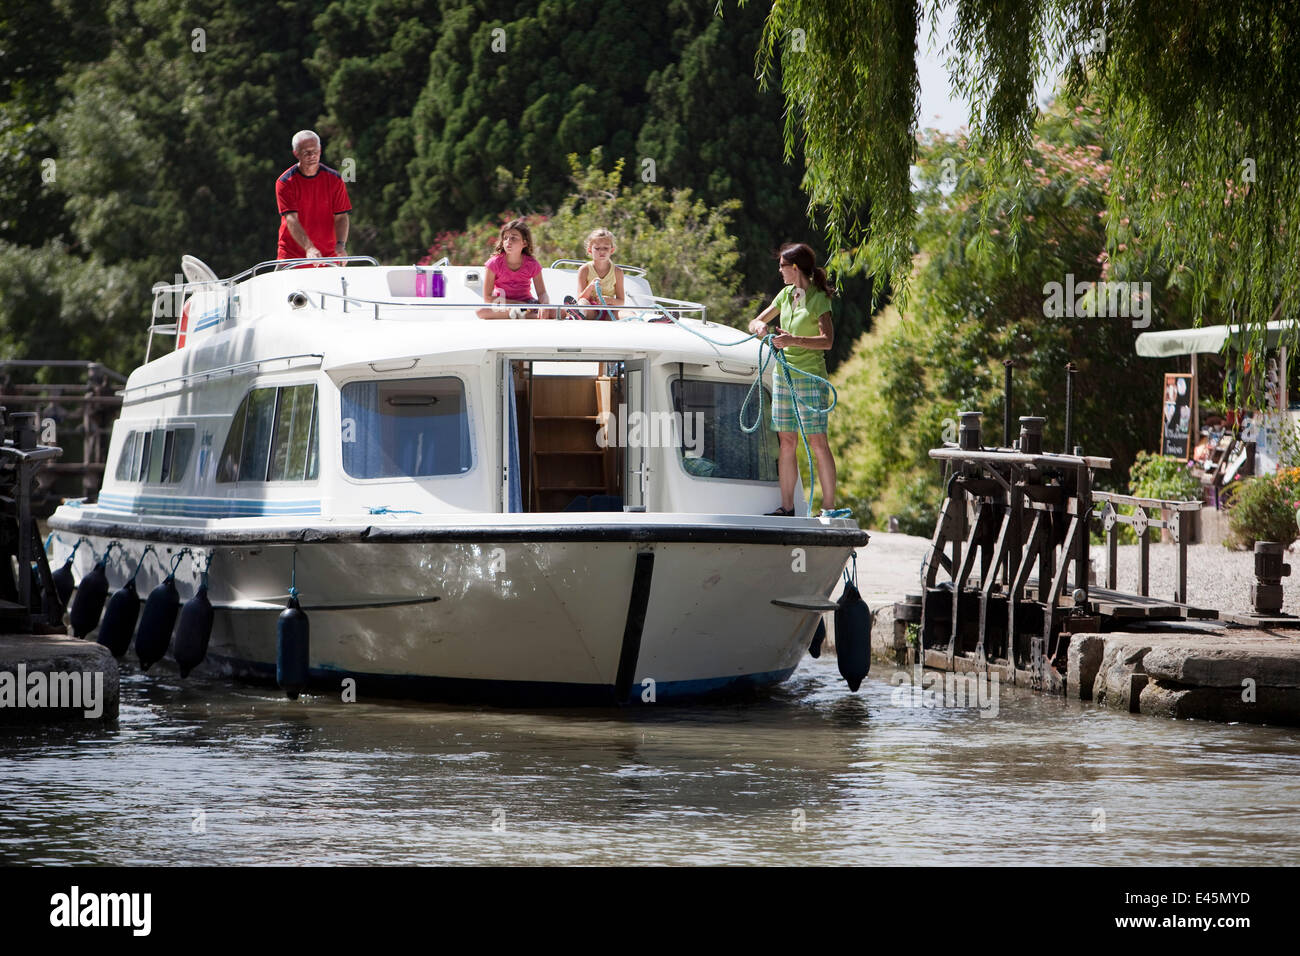 Family cruising on the Canal Du Midi near Argens-Minervois, southern France. July 2009. Model and property released. Stock Photo